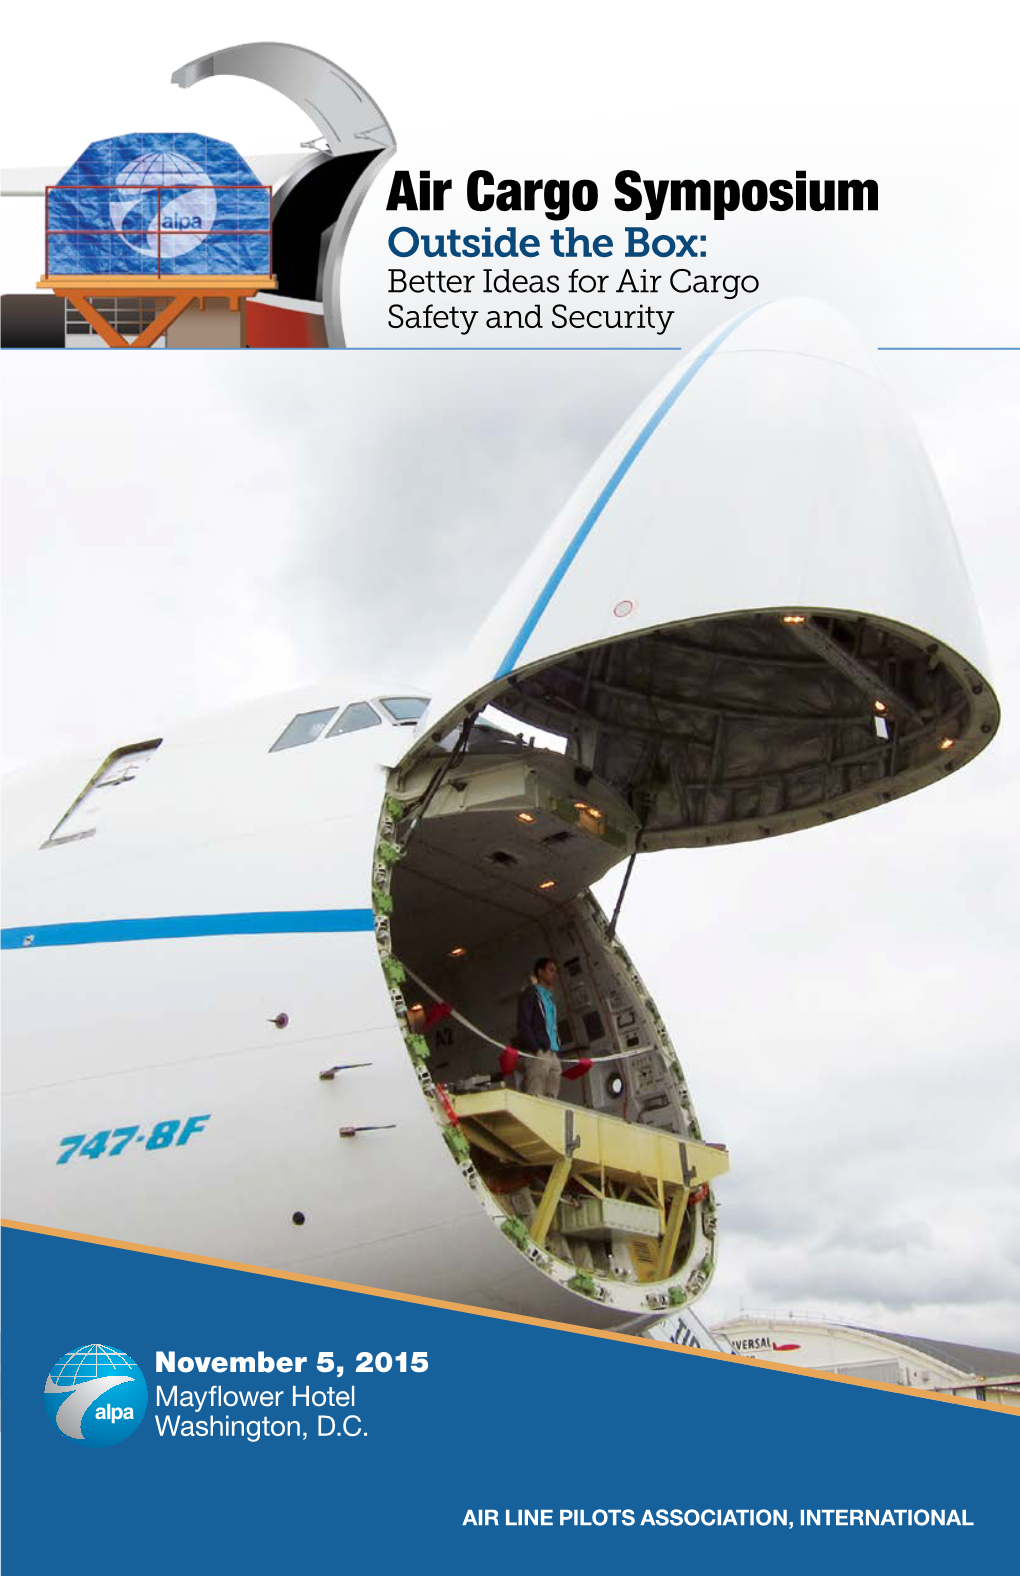 Air Cargo Symposium Outside the Box: Better Ideas for Air Cargo Safety and Security